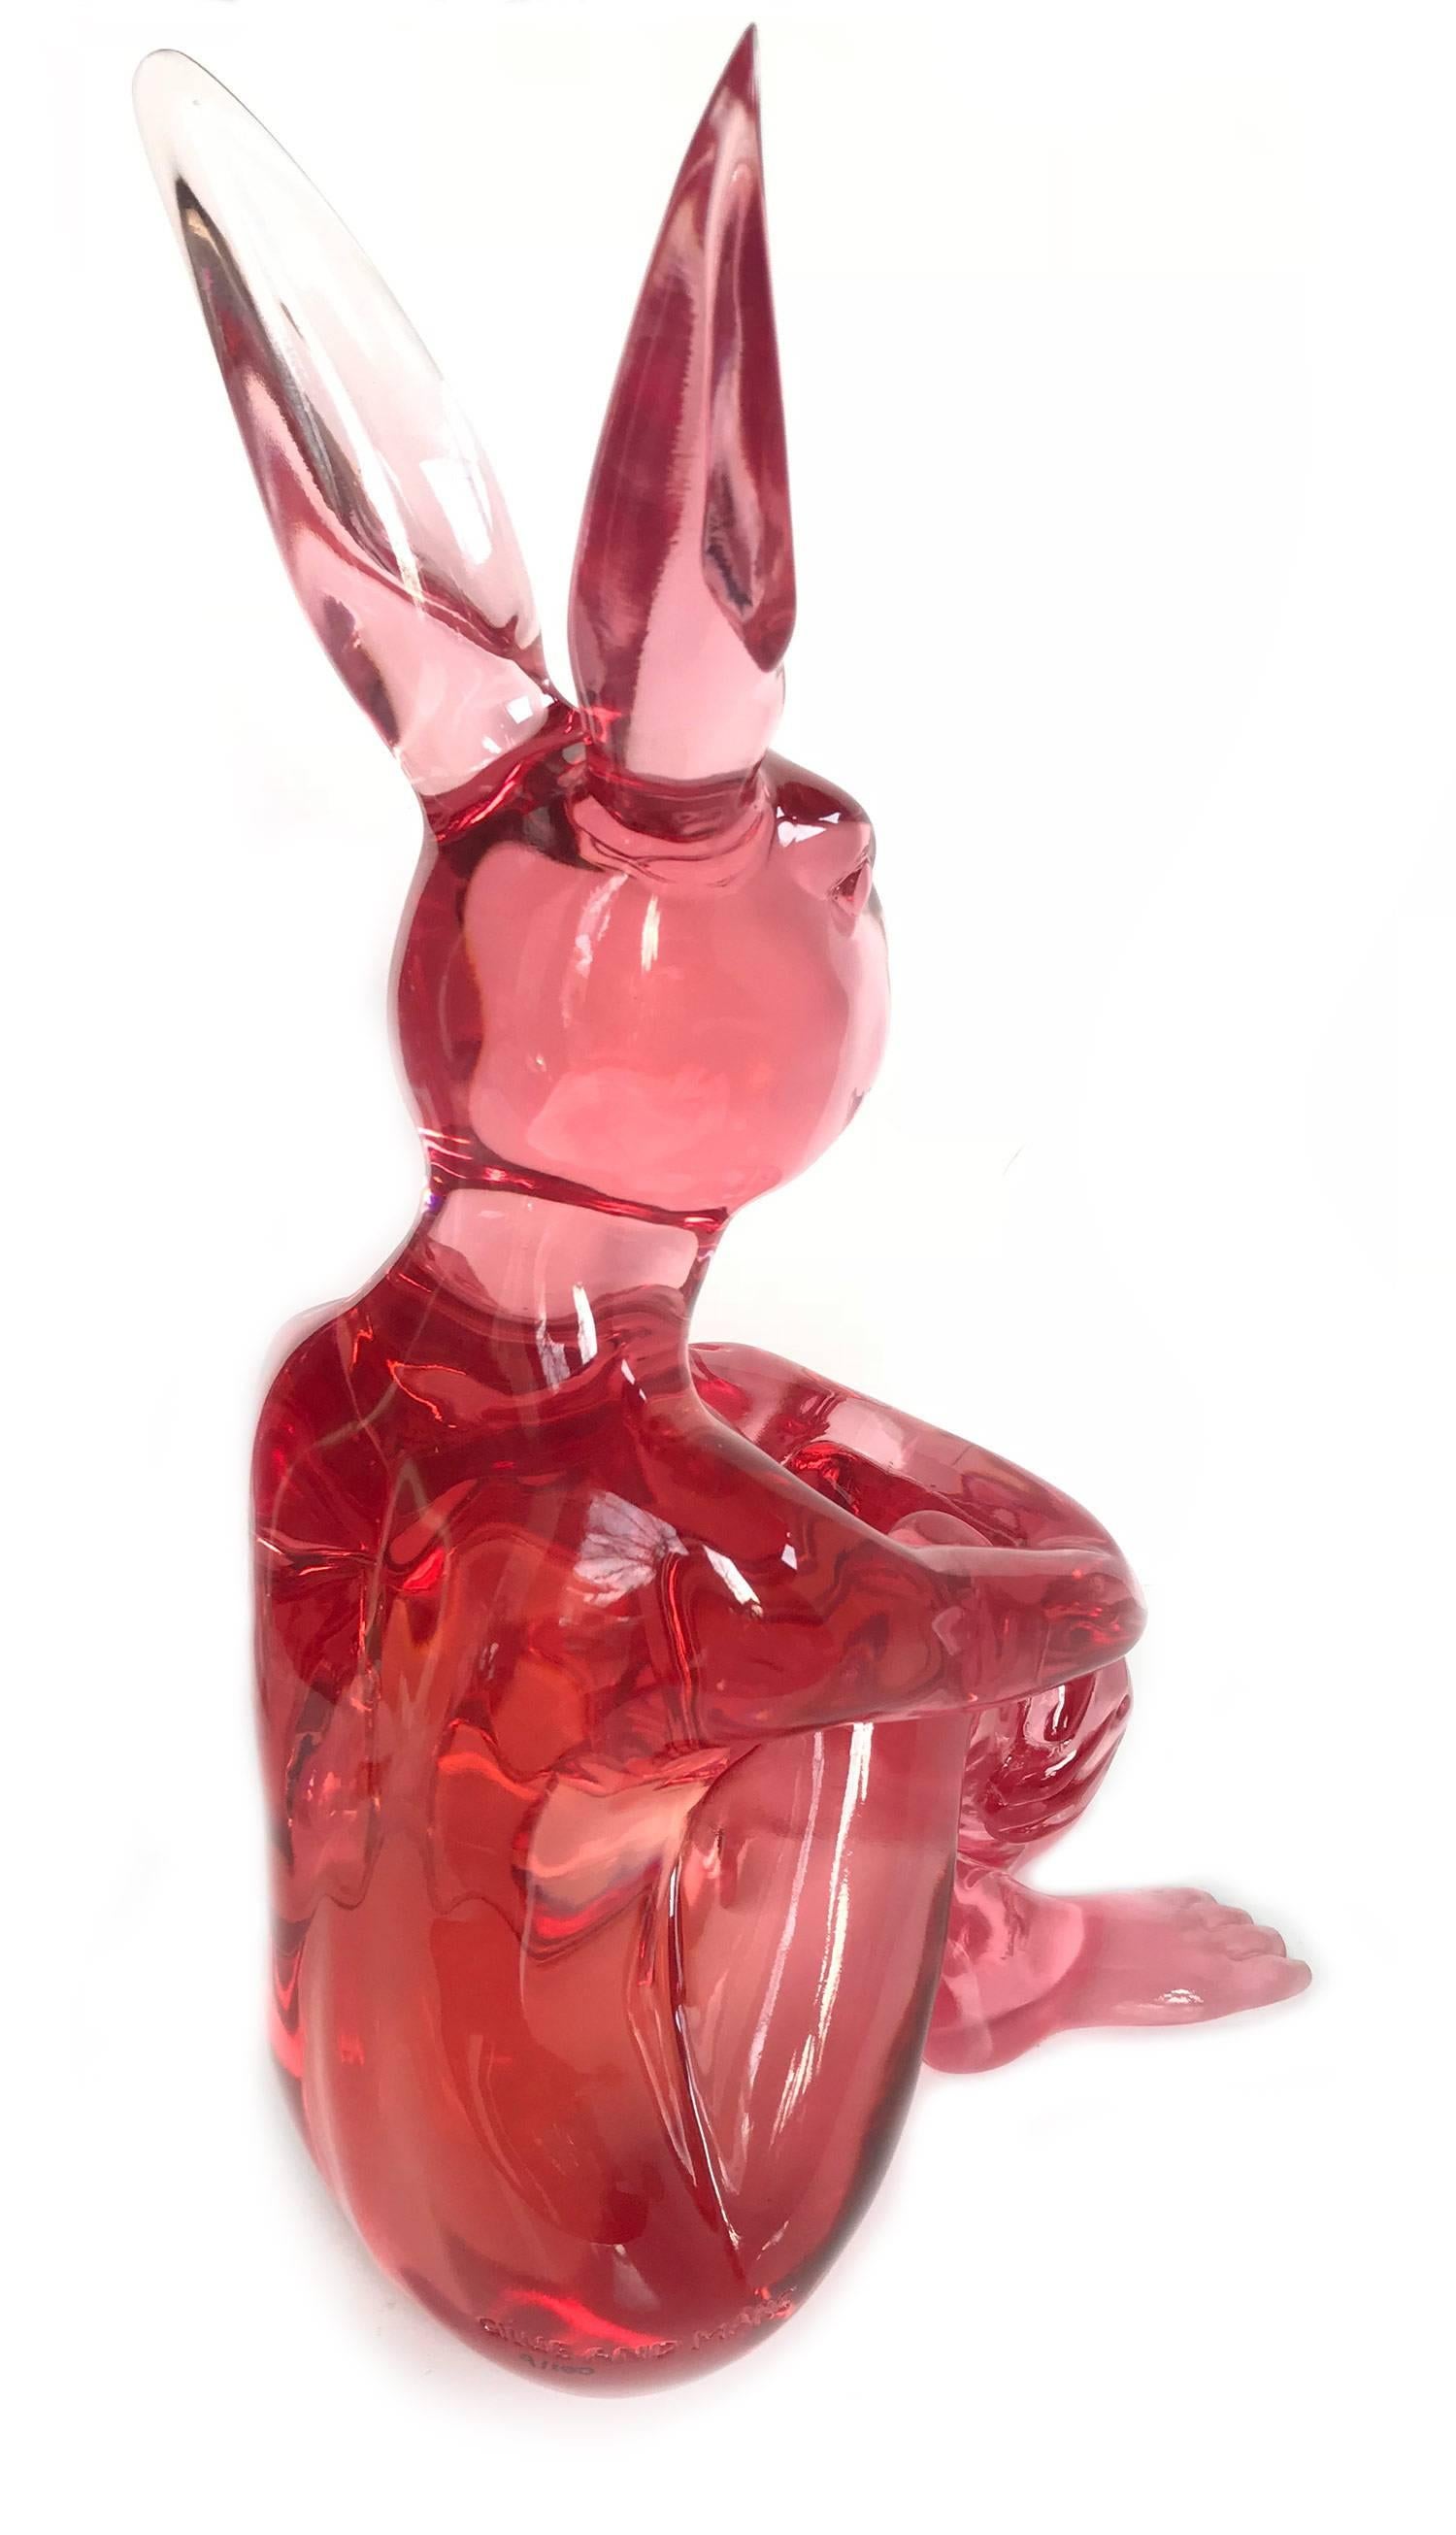 A whimsical yet very strong piece depicting the Dog Man from Gillie and Marc's iconic figures of the Dog/Bunny Human Hybrid, which has picked up much esteem across the globe. Here we find Rabbitgirl sitting crossed legged in a bright and fun Pink